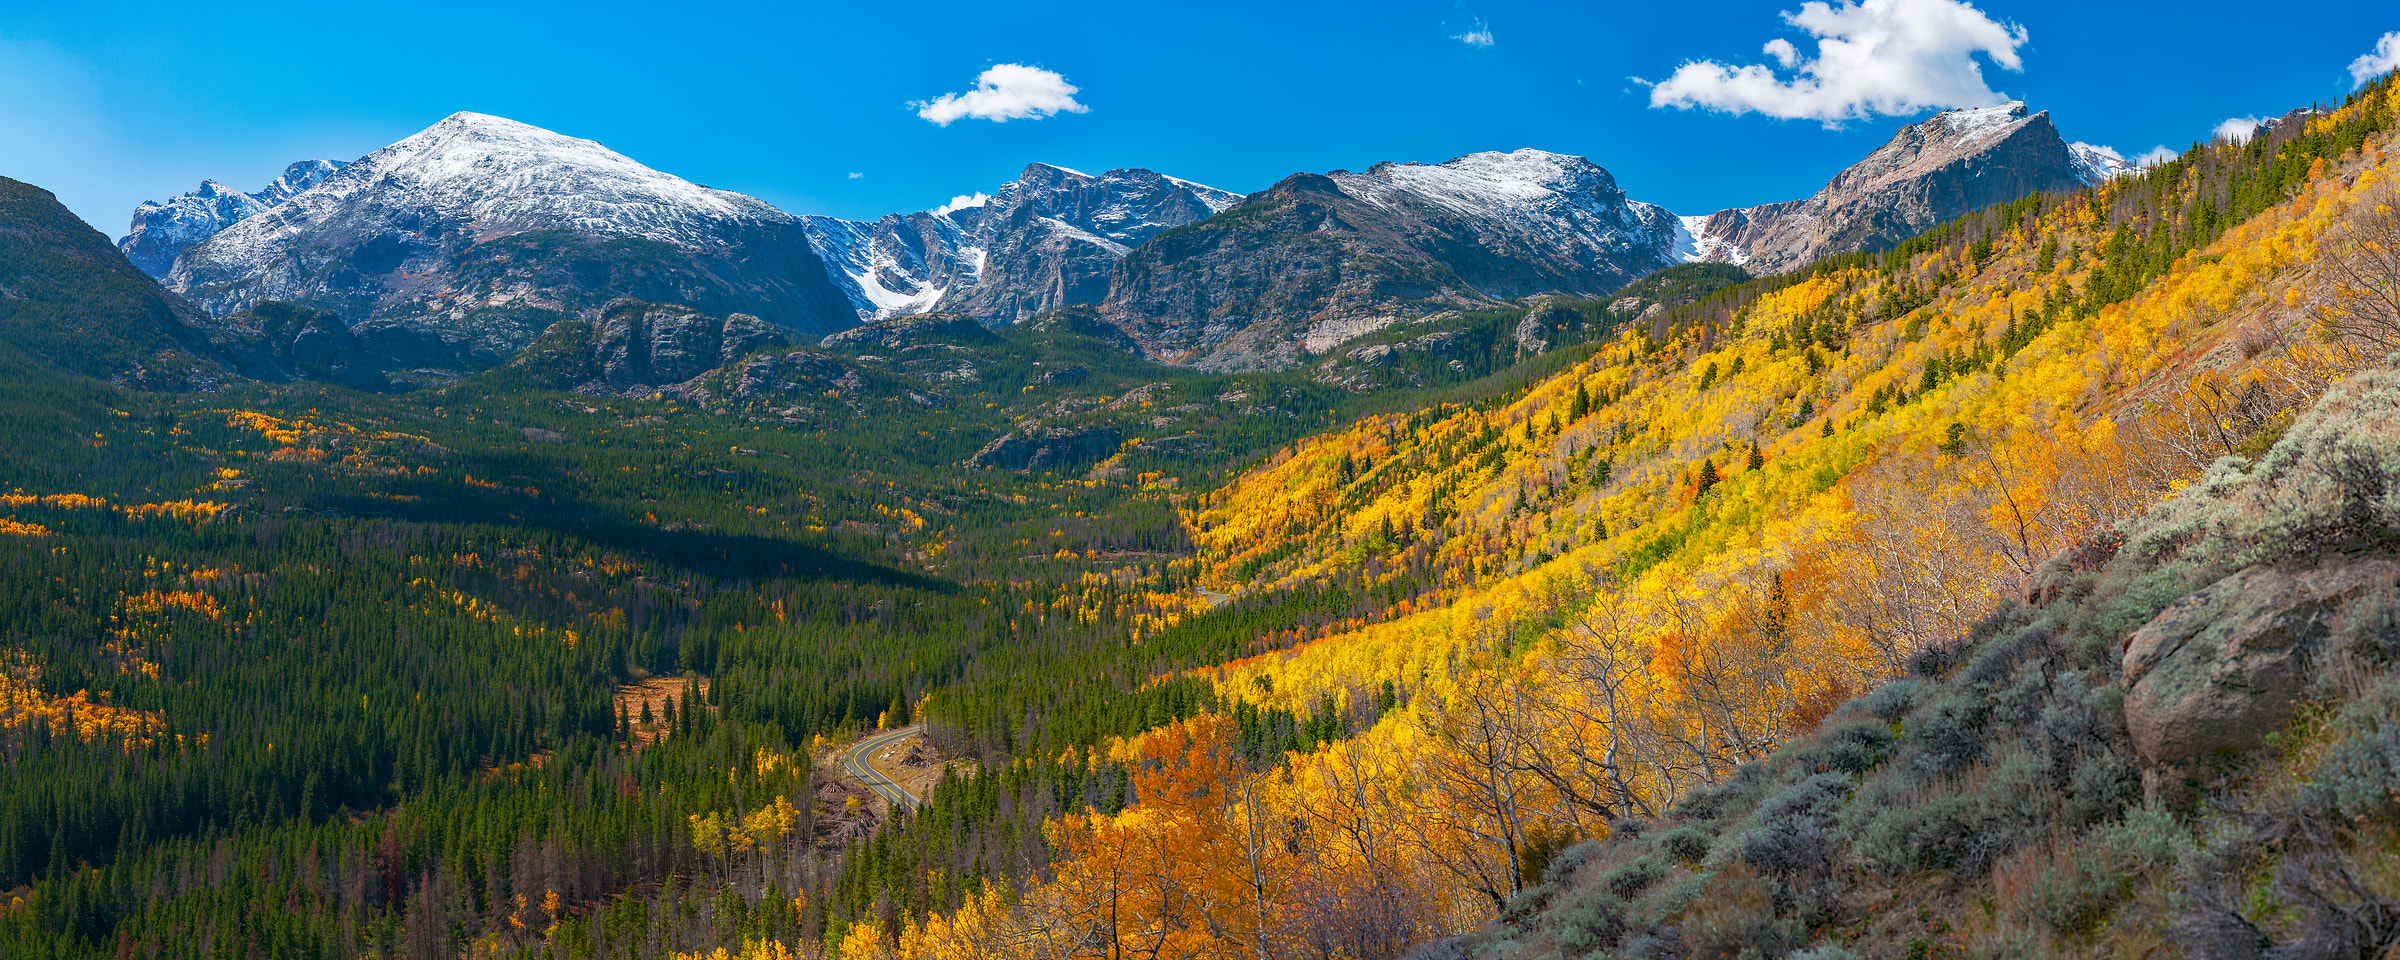 281 megapixels! A very high resolution, large-format VAST photo print of a valley with autumn foliage and snow-covered mountains in the background; landscape photograph created by John Freeman in Bear Lake Road, Rocky Mountain National Park, Colorado